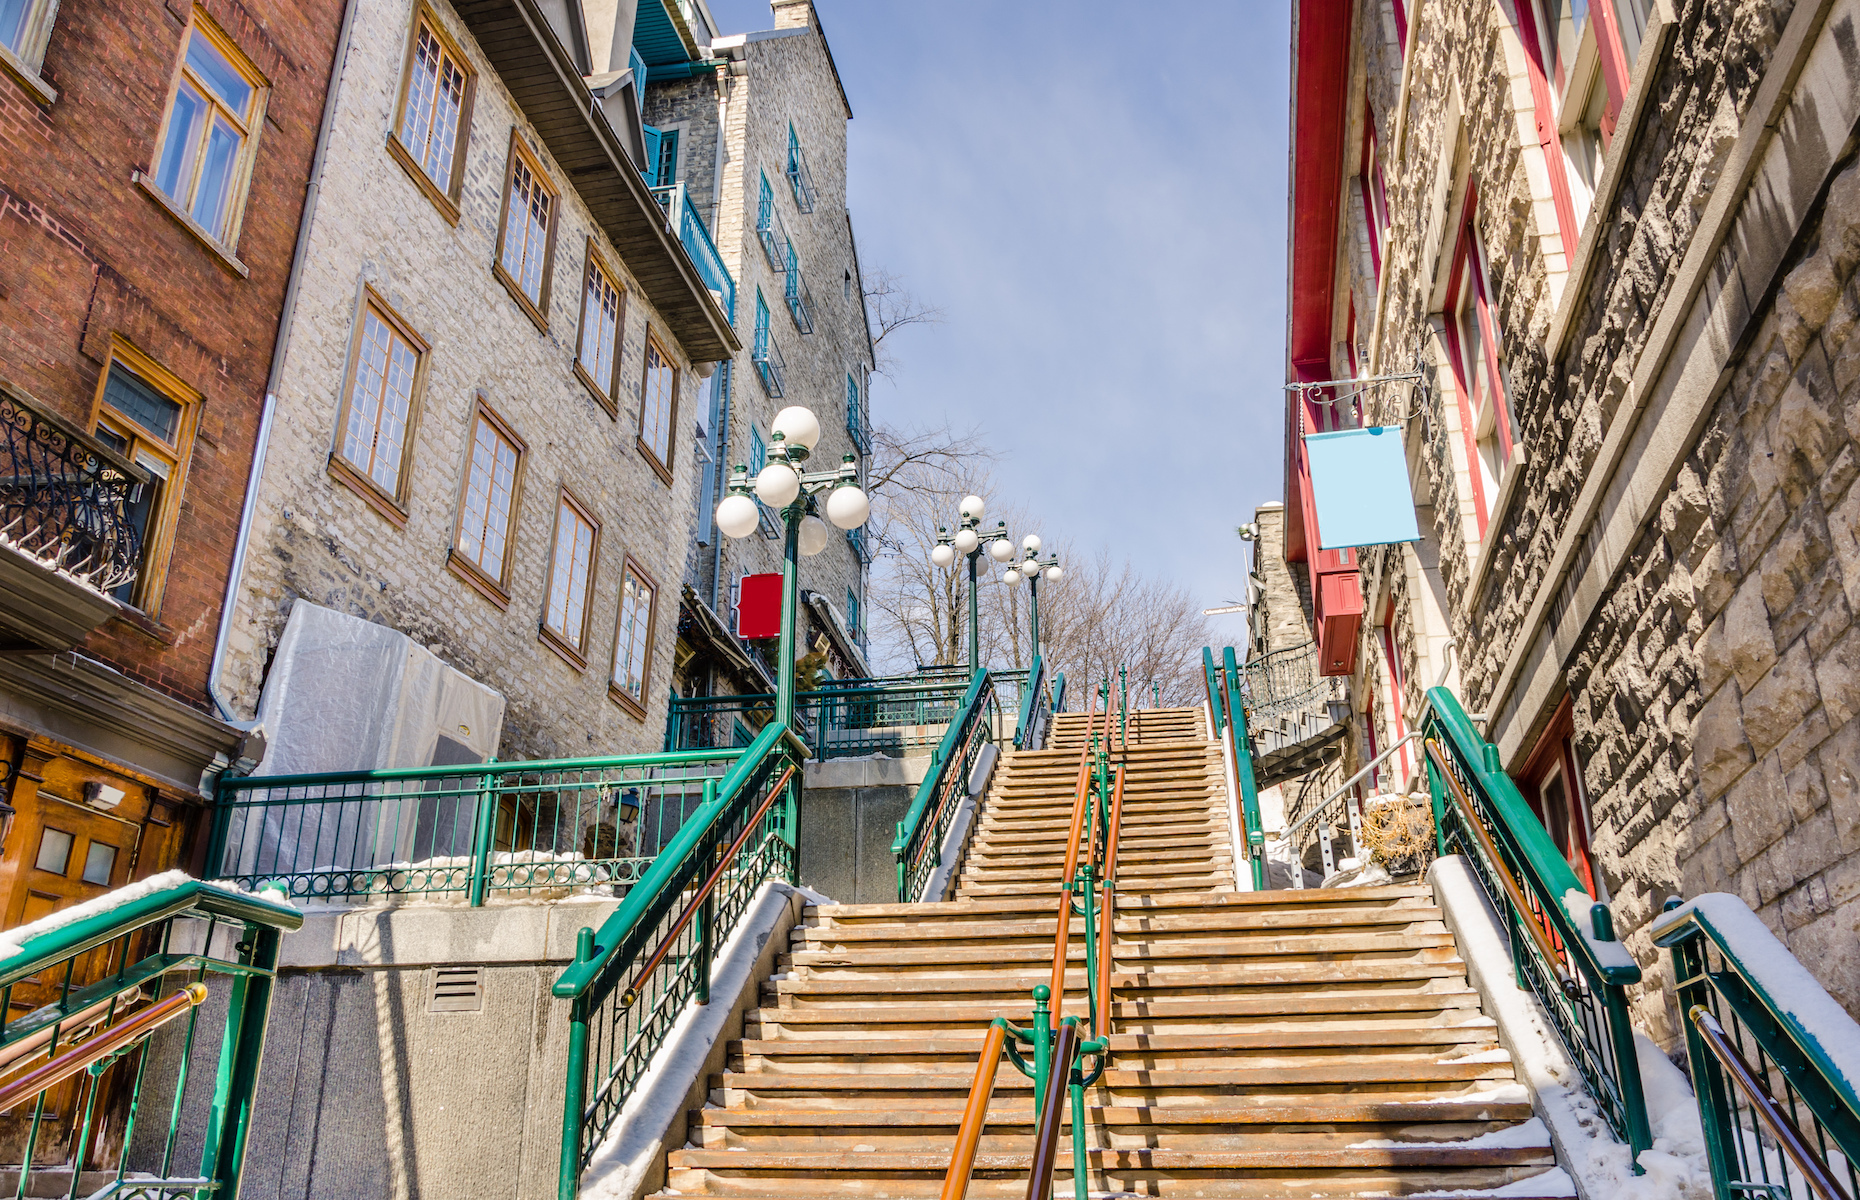 <p>The oldest staircase in Québec City, <a href="https://www.quebec-cite.com/en/what-to-do-quebec-city/breakneck-steps">Breakneck Stairs</a>, was <a href="https://www.quebec-cite.com/en/quebec-city/staircases">built in 1635</a> and offers panoramic views of Old Québec City from the top of its steps. Travellers will enjoy exploring the historical architecture, narrow cobblestone streets, and mural paintings of the Petit Champlain district where the steps are located.</p>